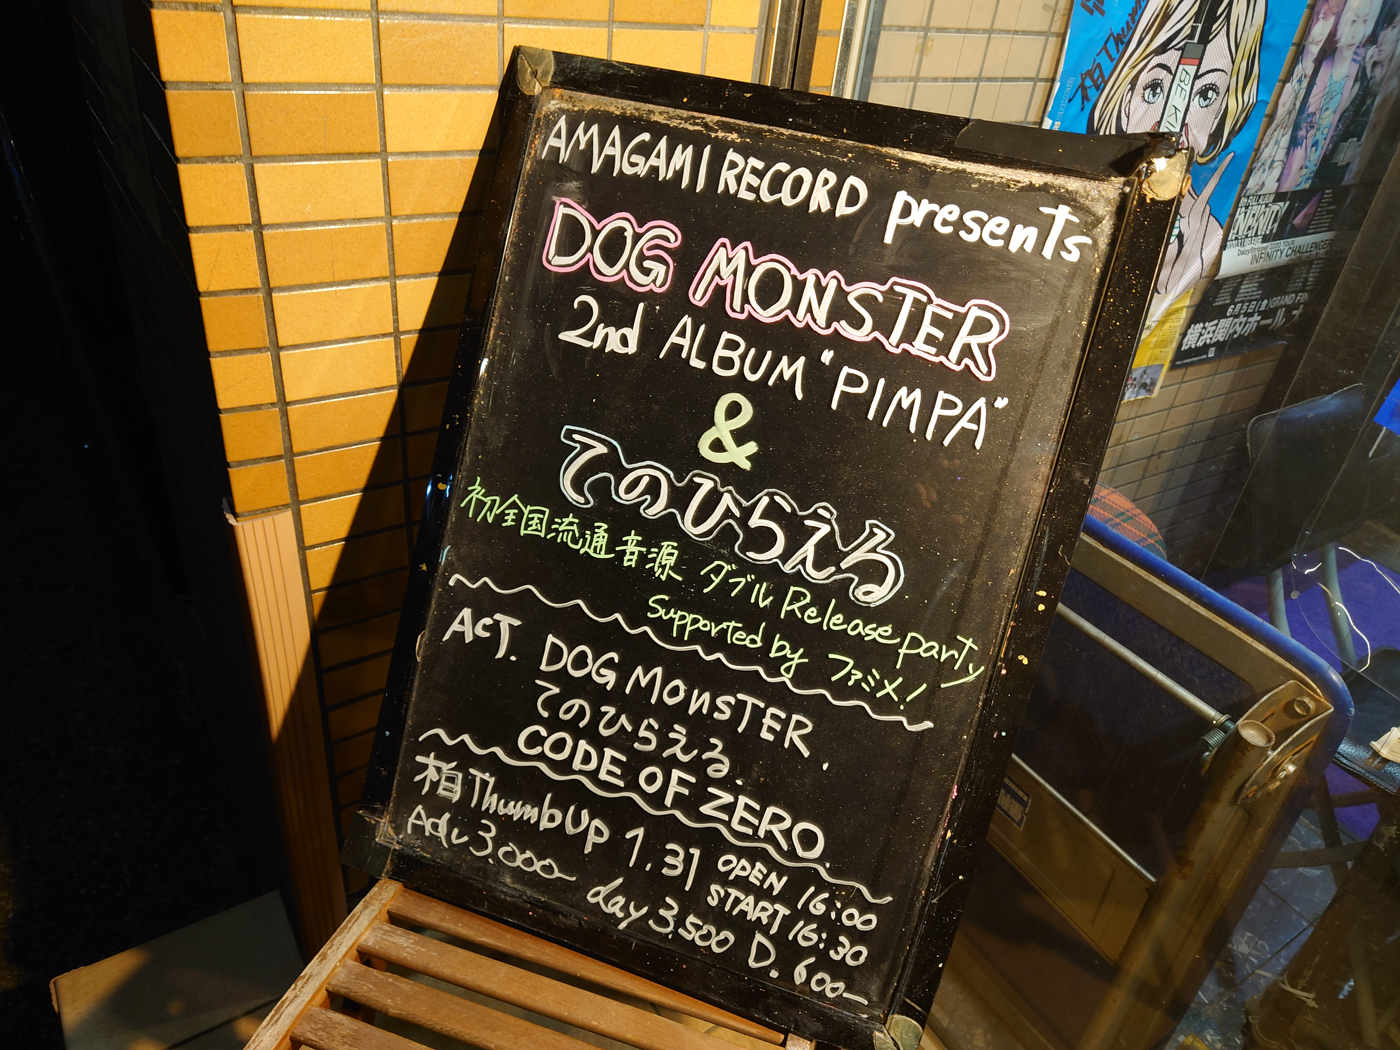 AMAGAMI RECORD presents 『DOG MONSTER 2ndALBUM”PIMPA”&てのひらえる初全国流通音源ダブルRelease party』 supported by ファミメ！@柏thumbup